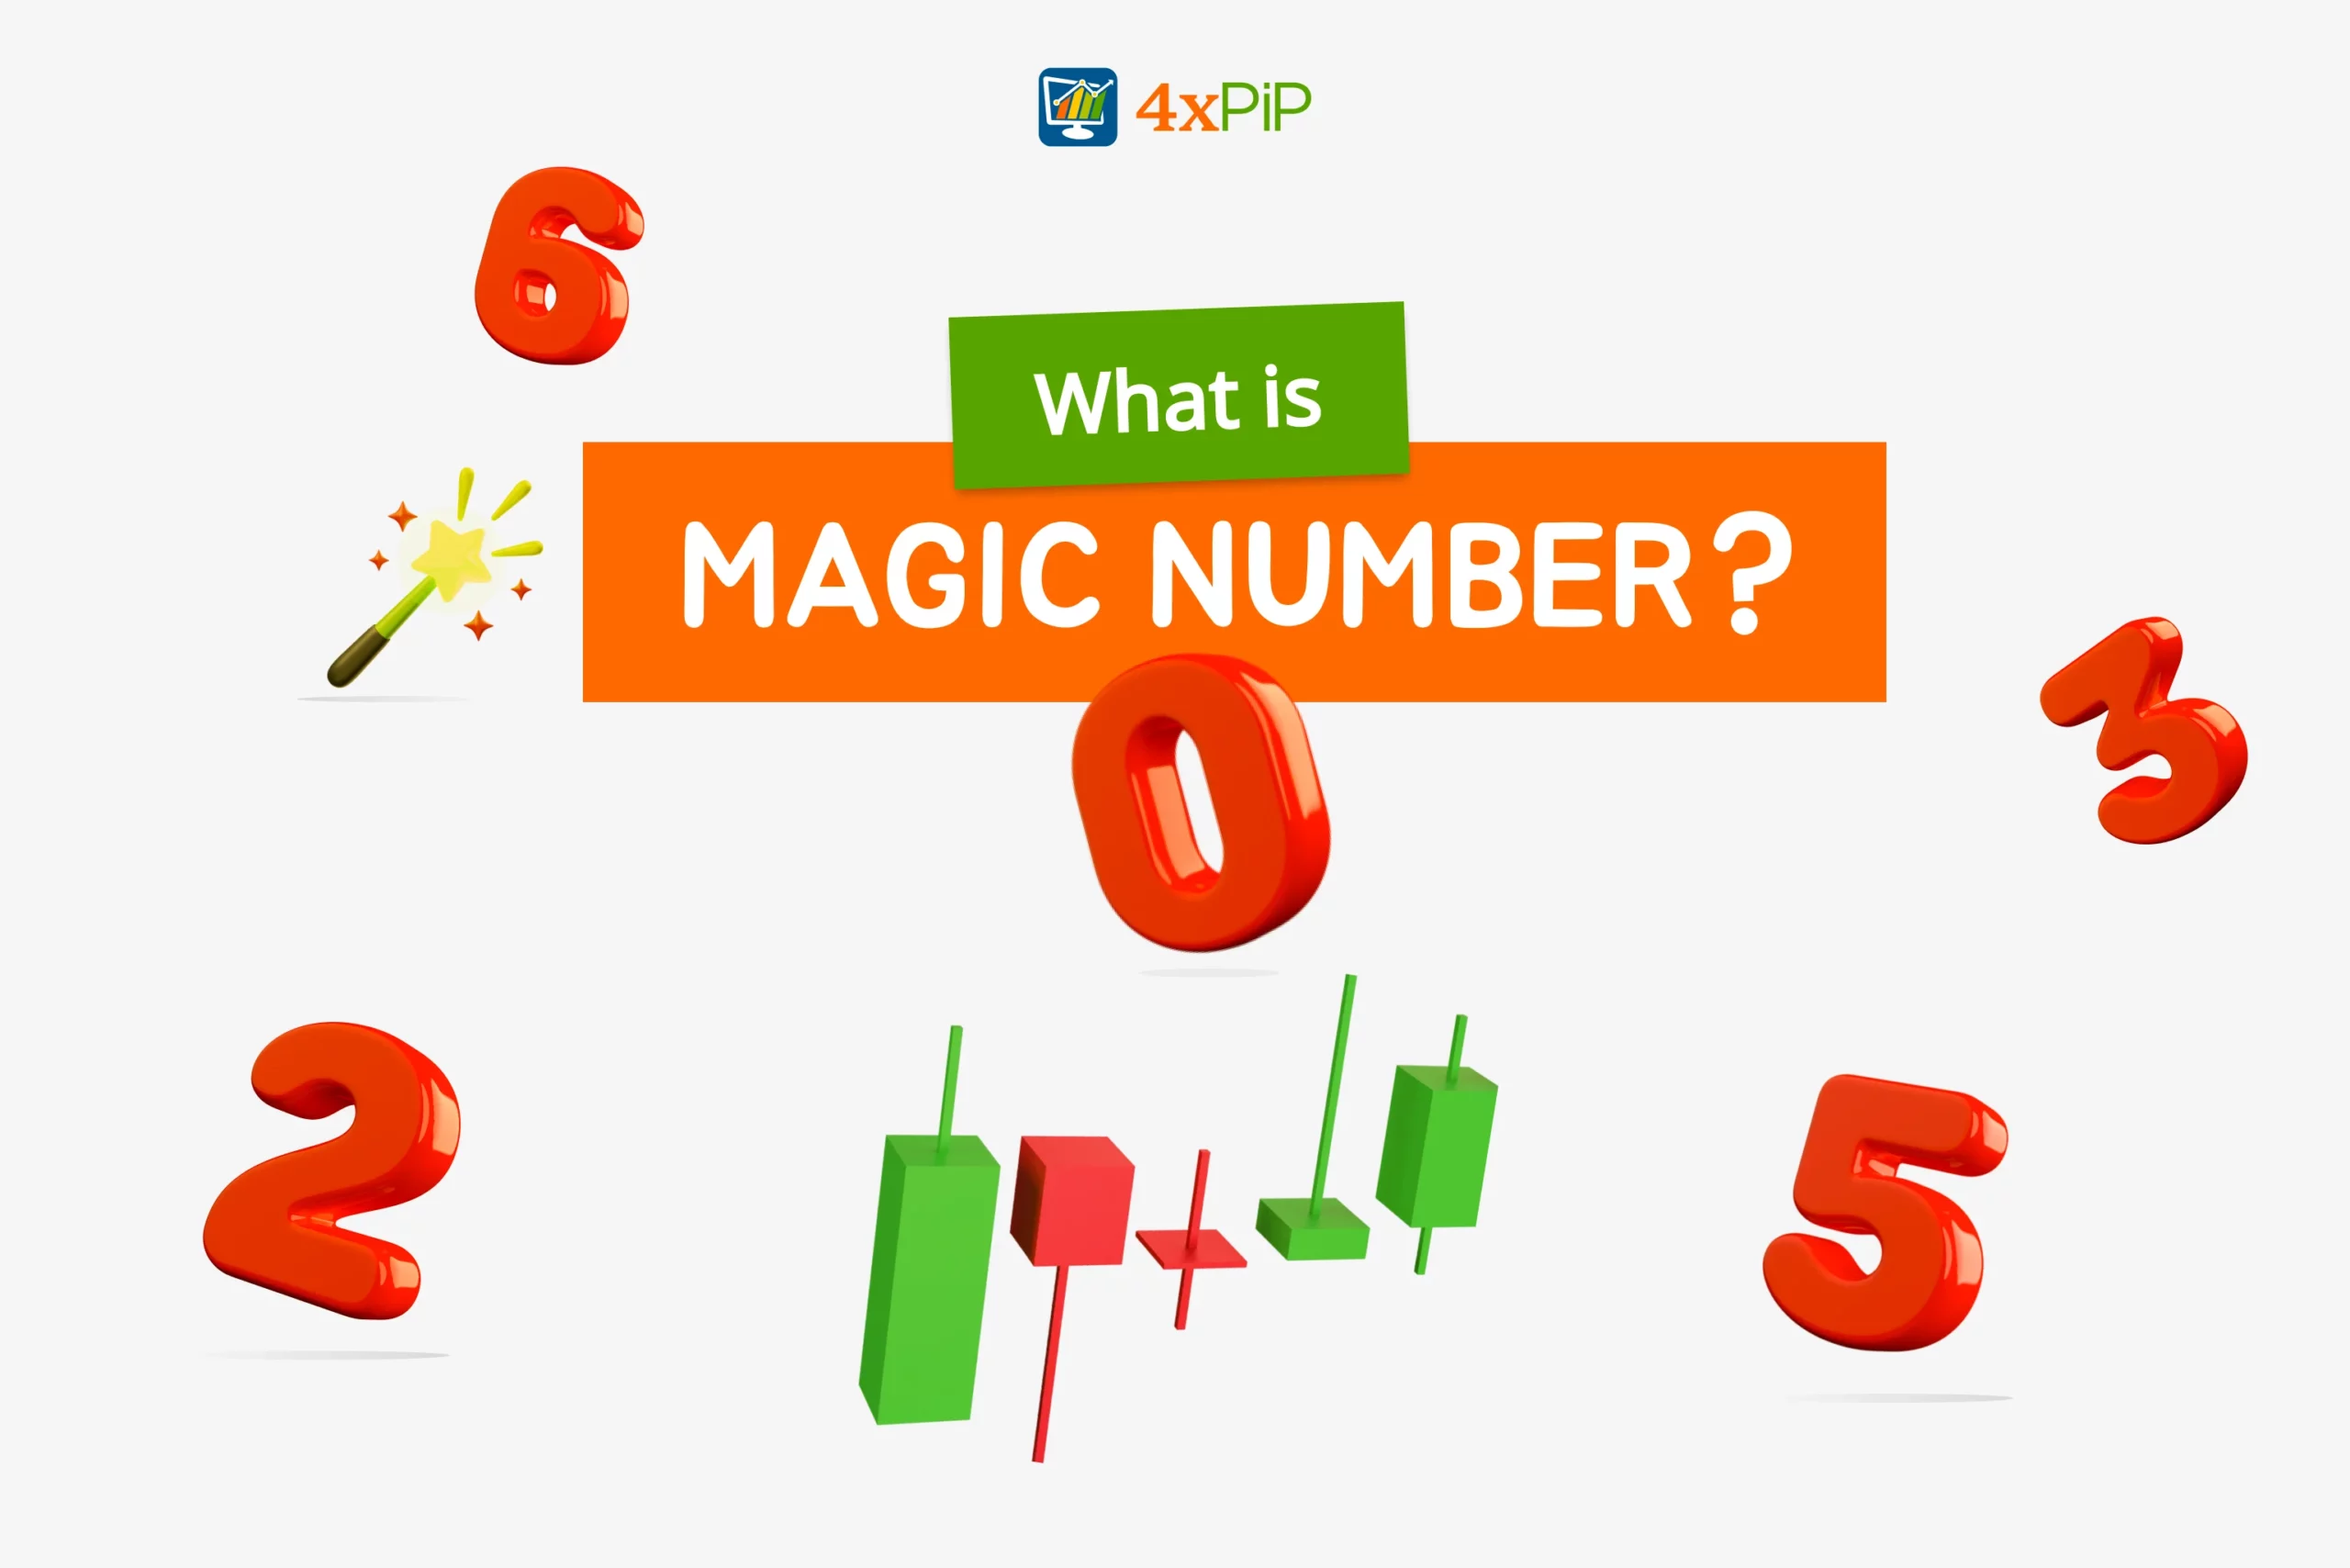 What is a Magic number in Forex?